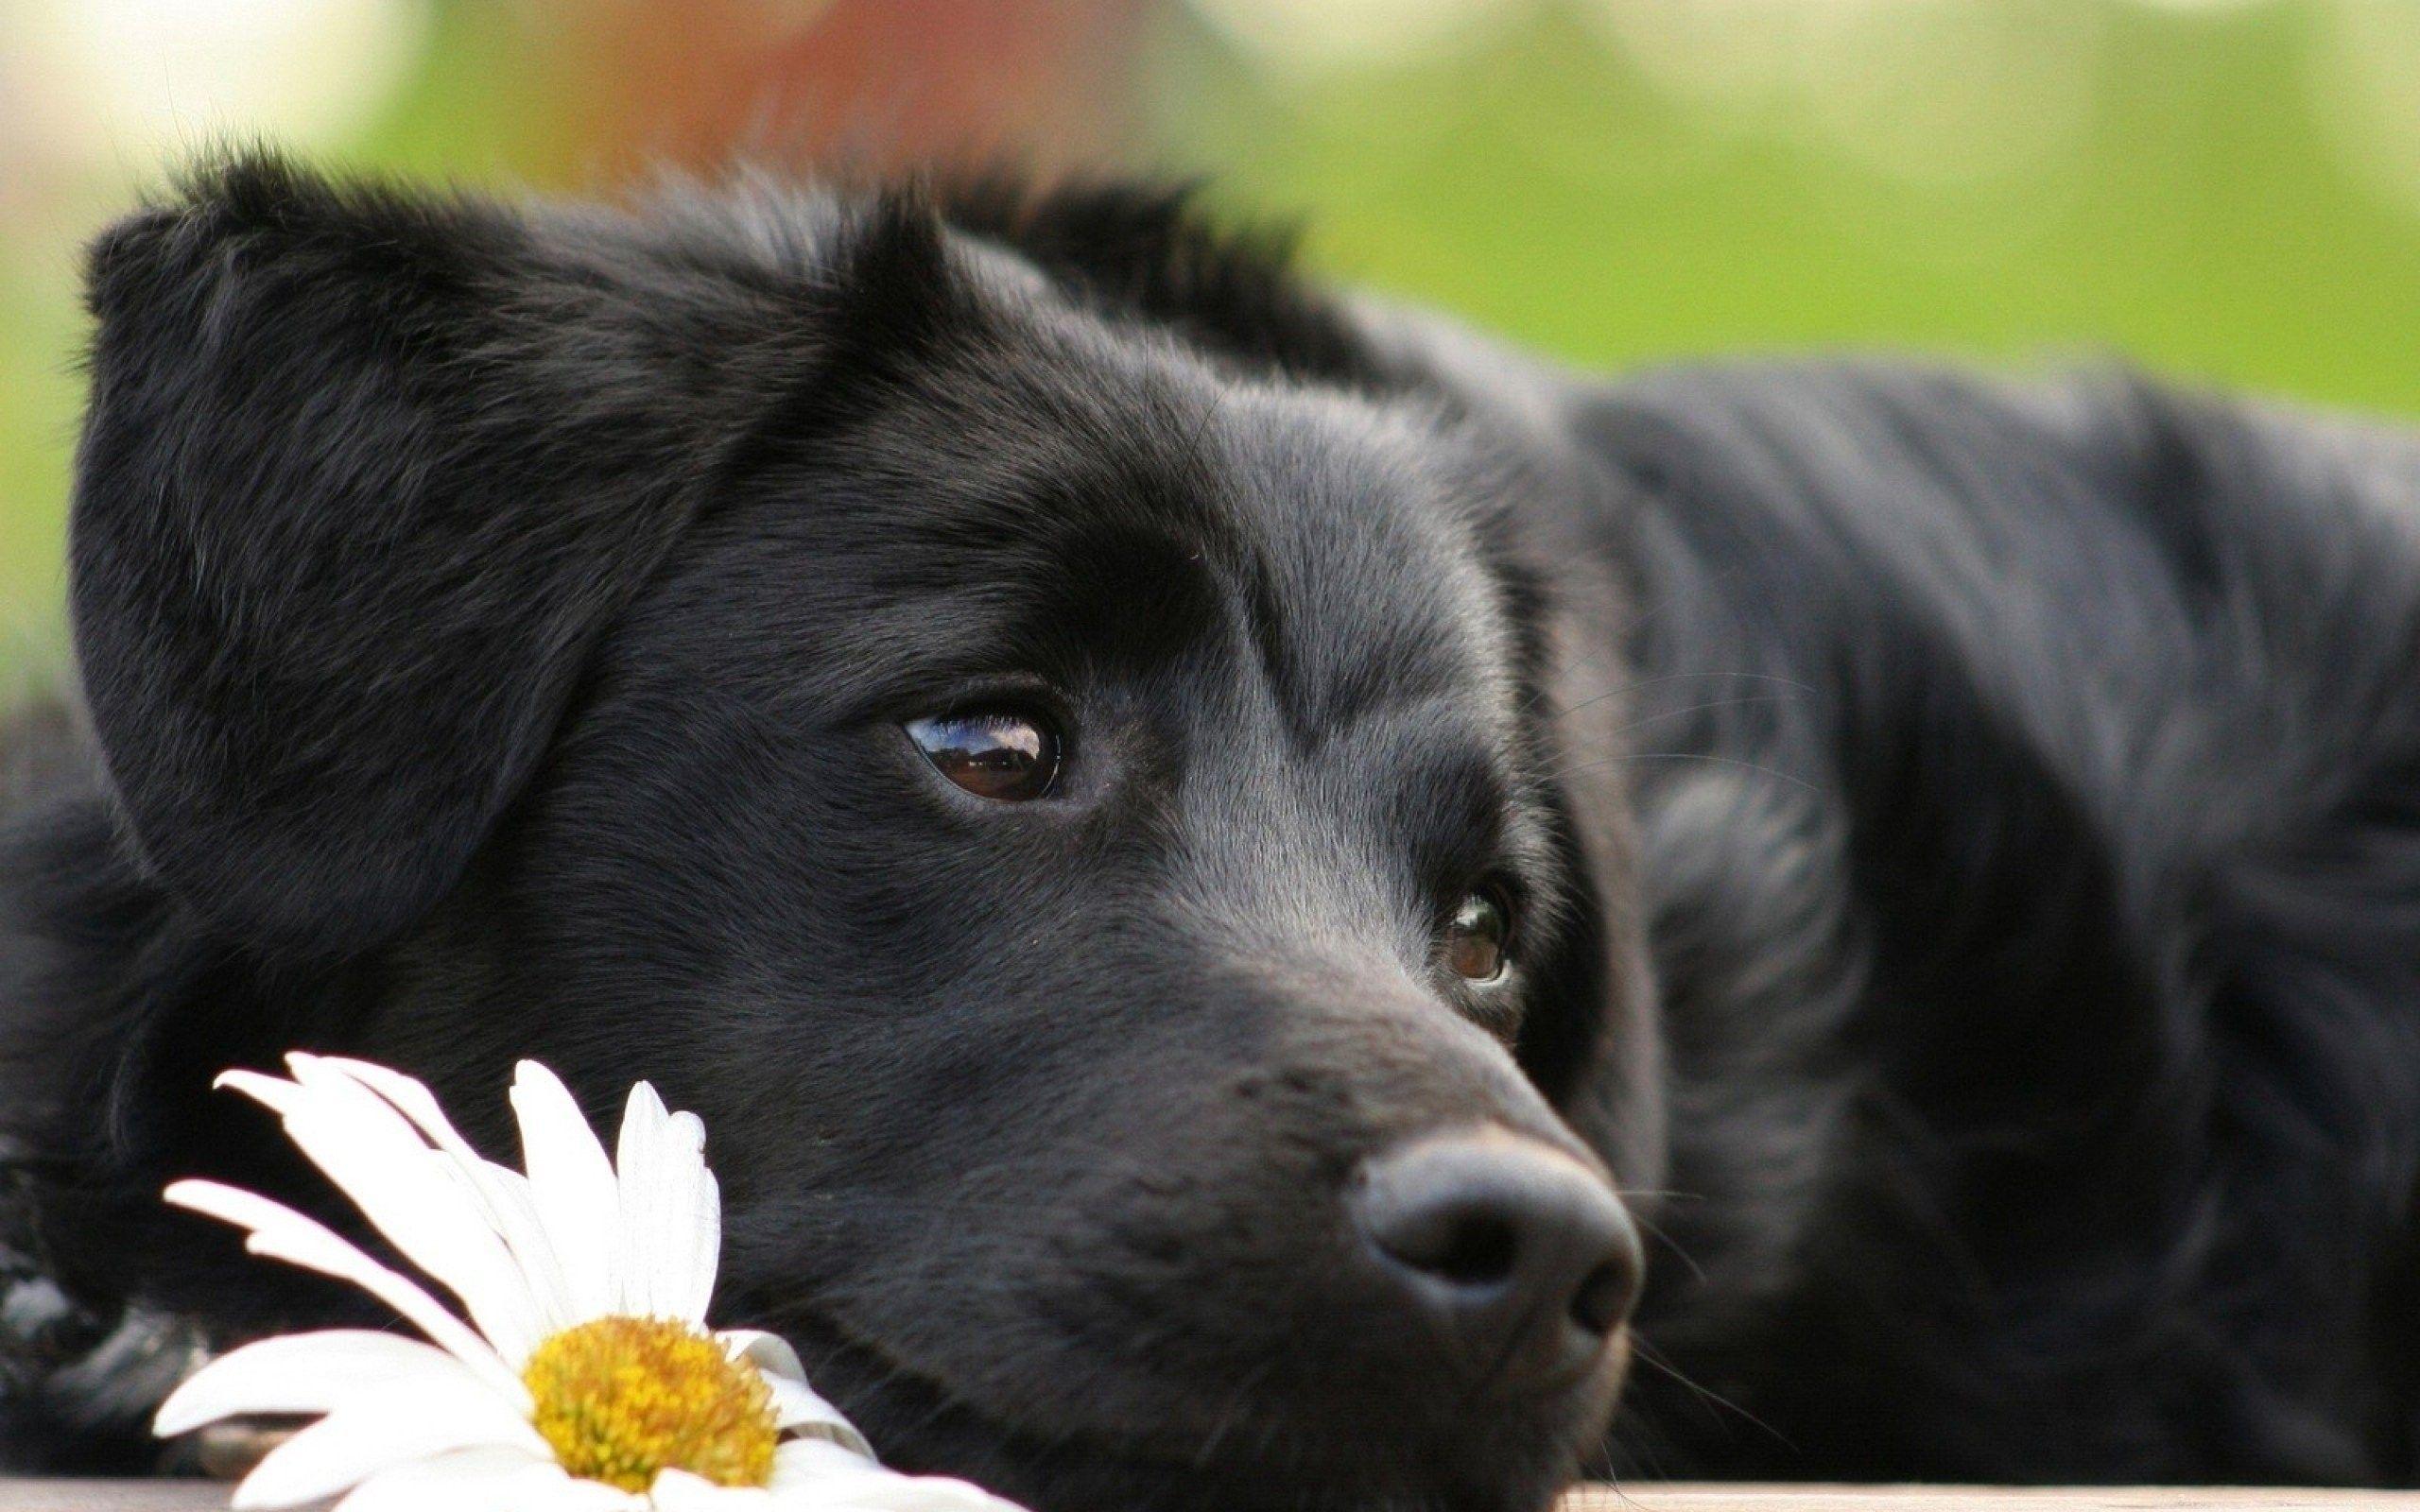 Cute Black Dog Wallpapers - Top Free Cute Black Dog Backgrounds